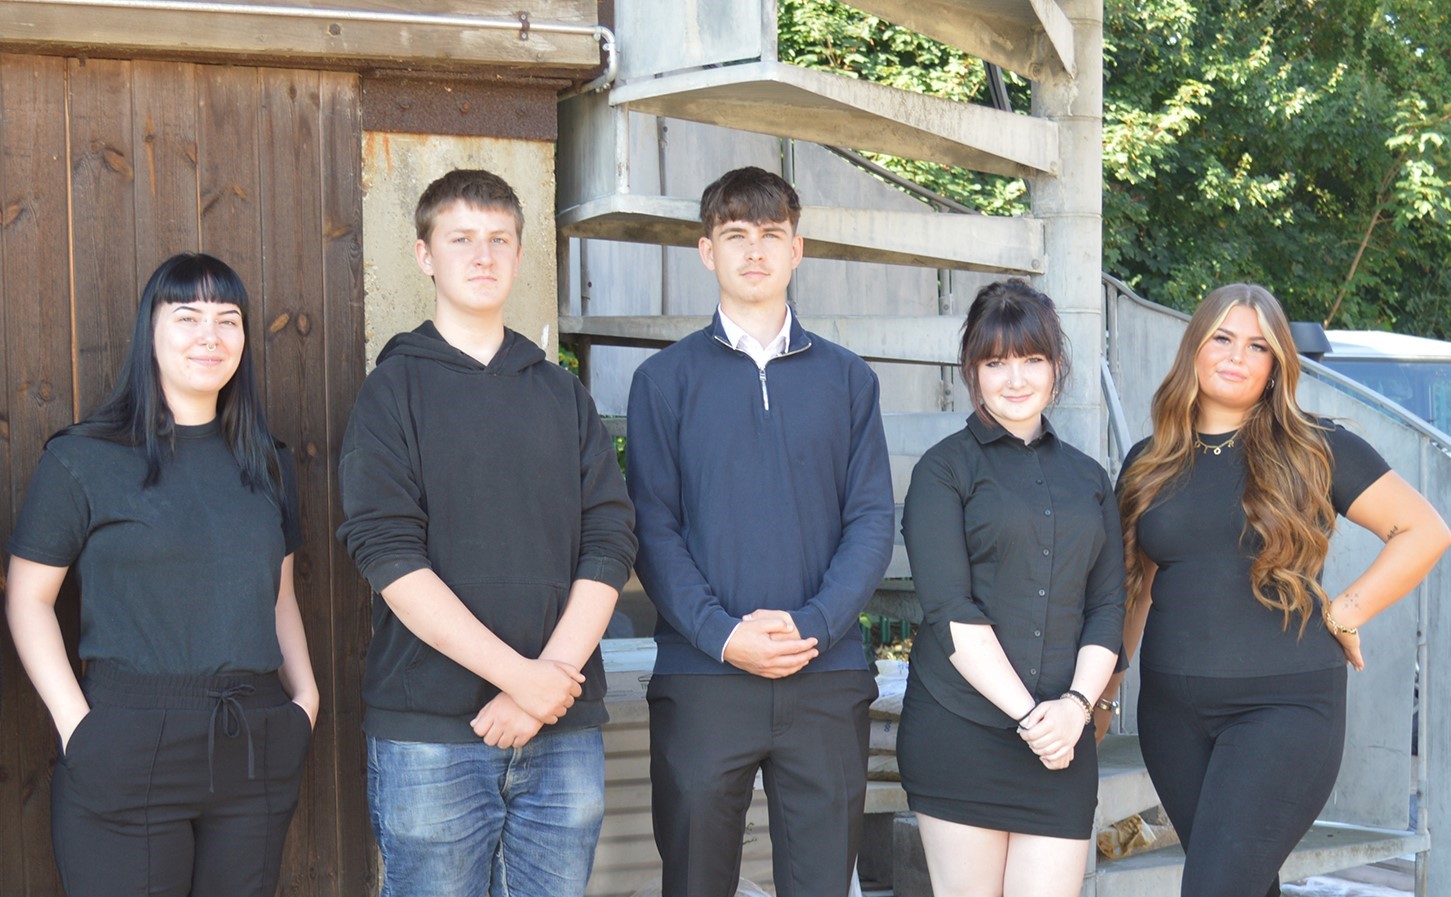 Local Apprentices Share Their ‘Skills for Life’ for National Apprenticeship Week